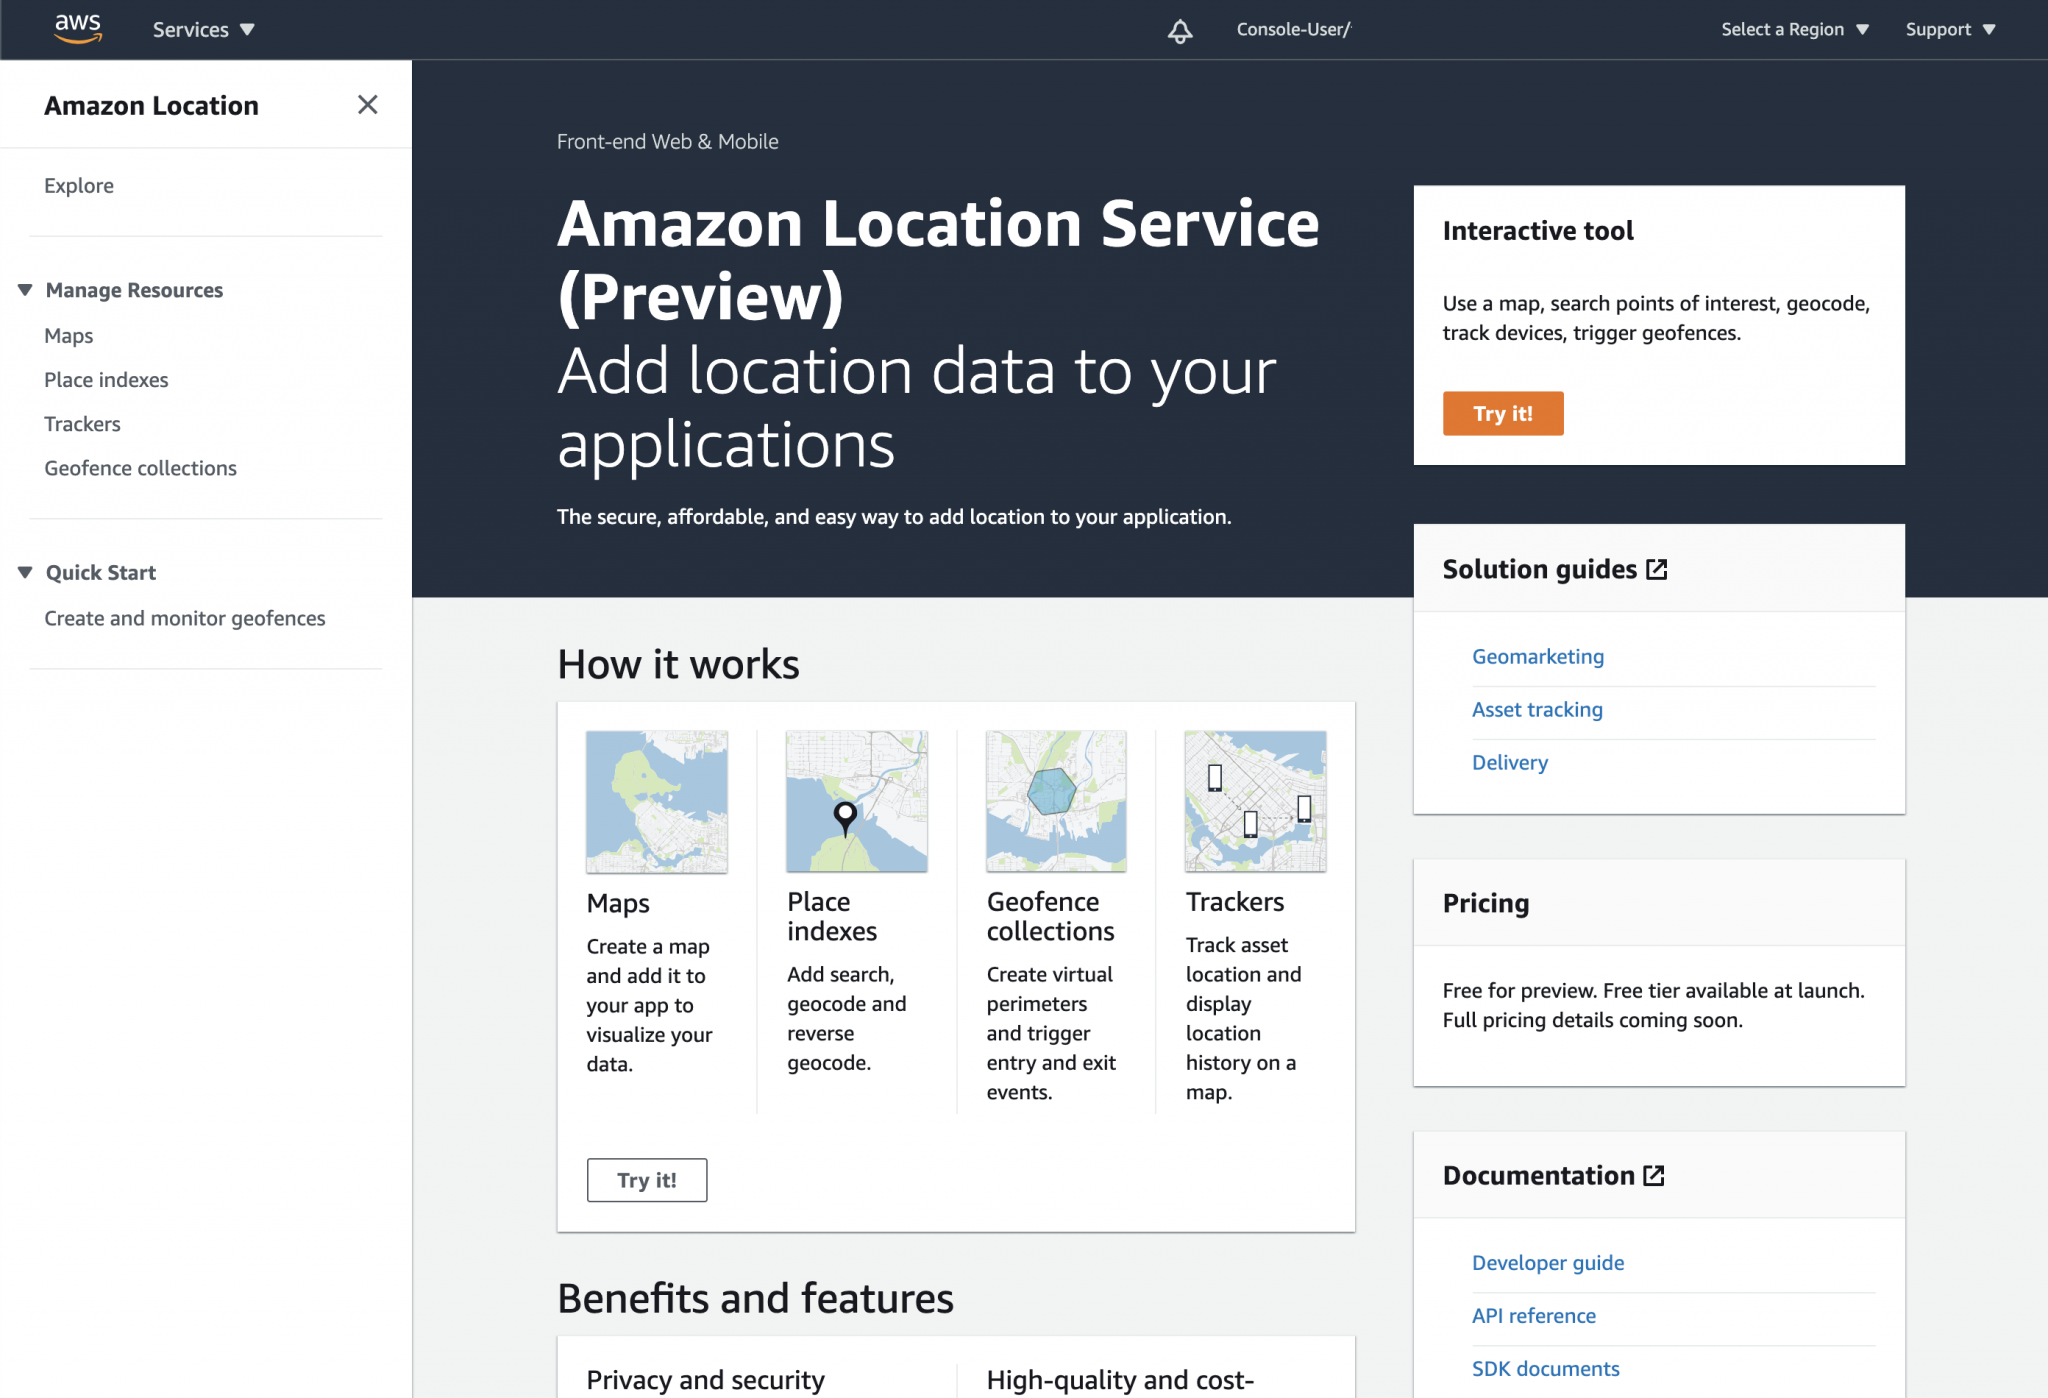 Interview: Amazon Location makes it easier to access cost-effective, location services